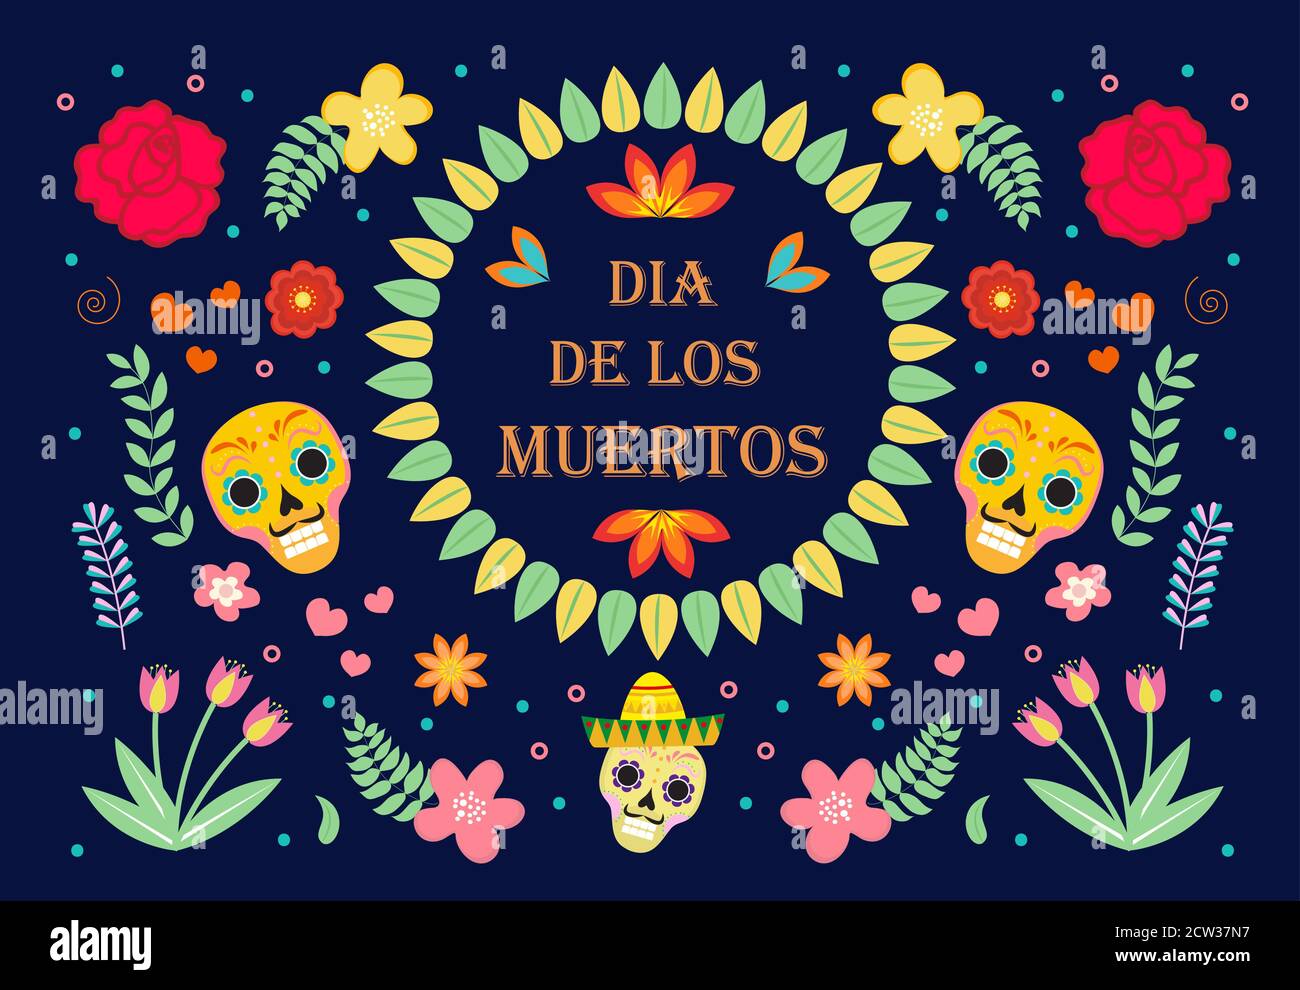 Day of the Dead Mexican holiday icons flat style. Dia de los muertos collection of objects, design elements with sugar skull, skeleton, flowers Stock Vector